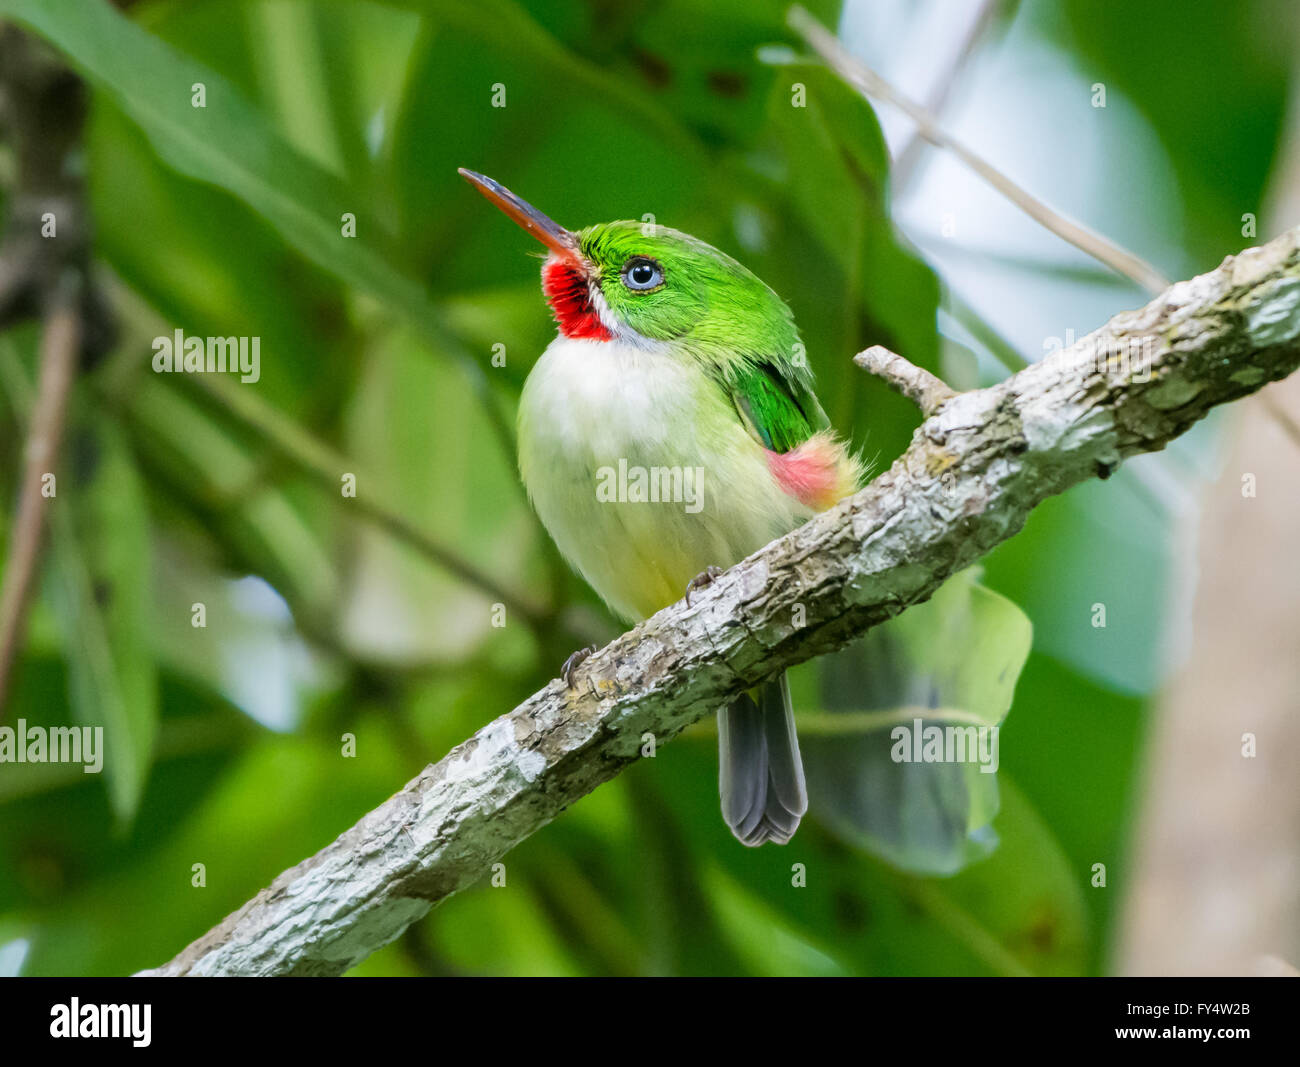 An endemic species Jamaican Tody (Todus todus) perched on a branch. Jamaica, Caribbeans. Stock Photo